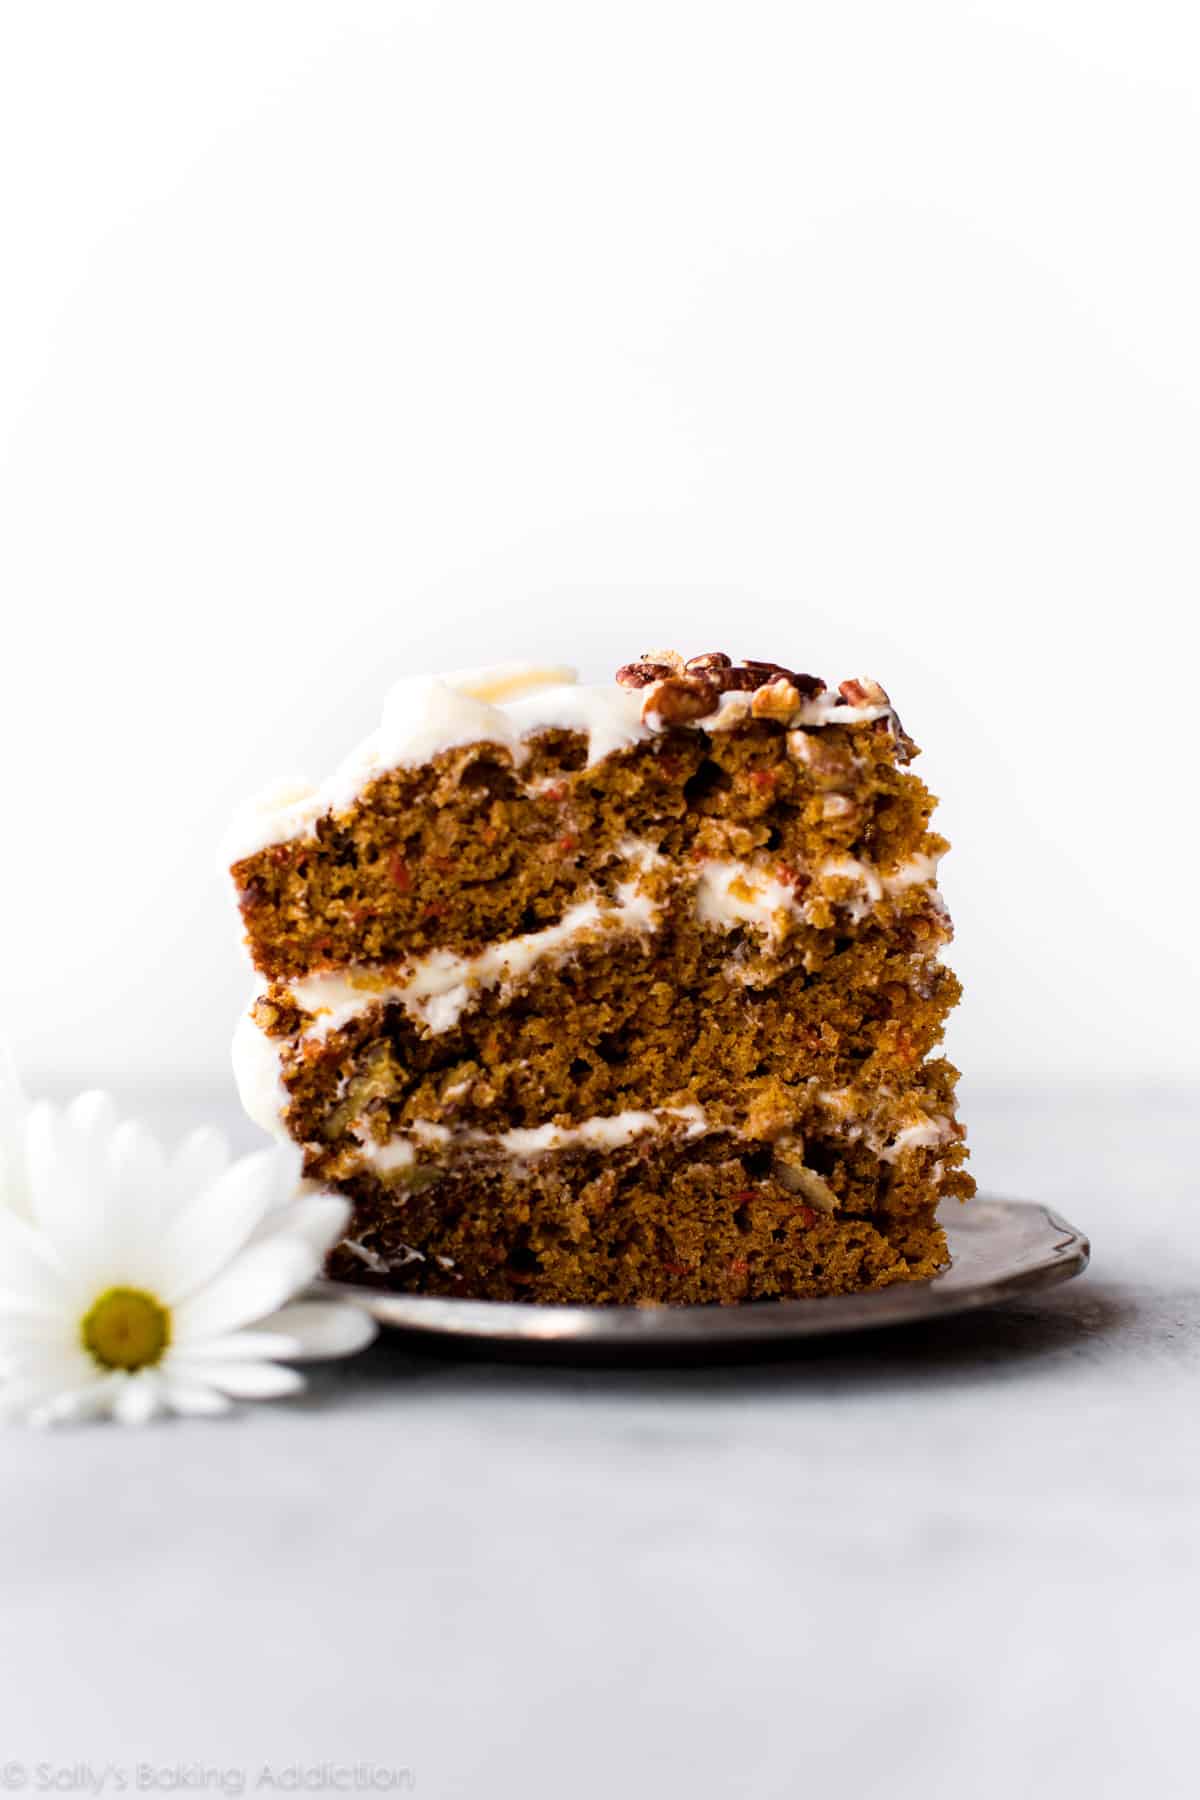 slice of carrot cake with cream cheese frosting on silver plate